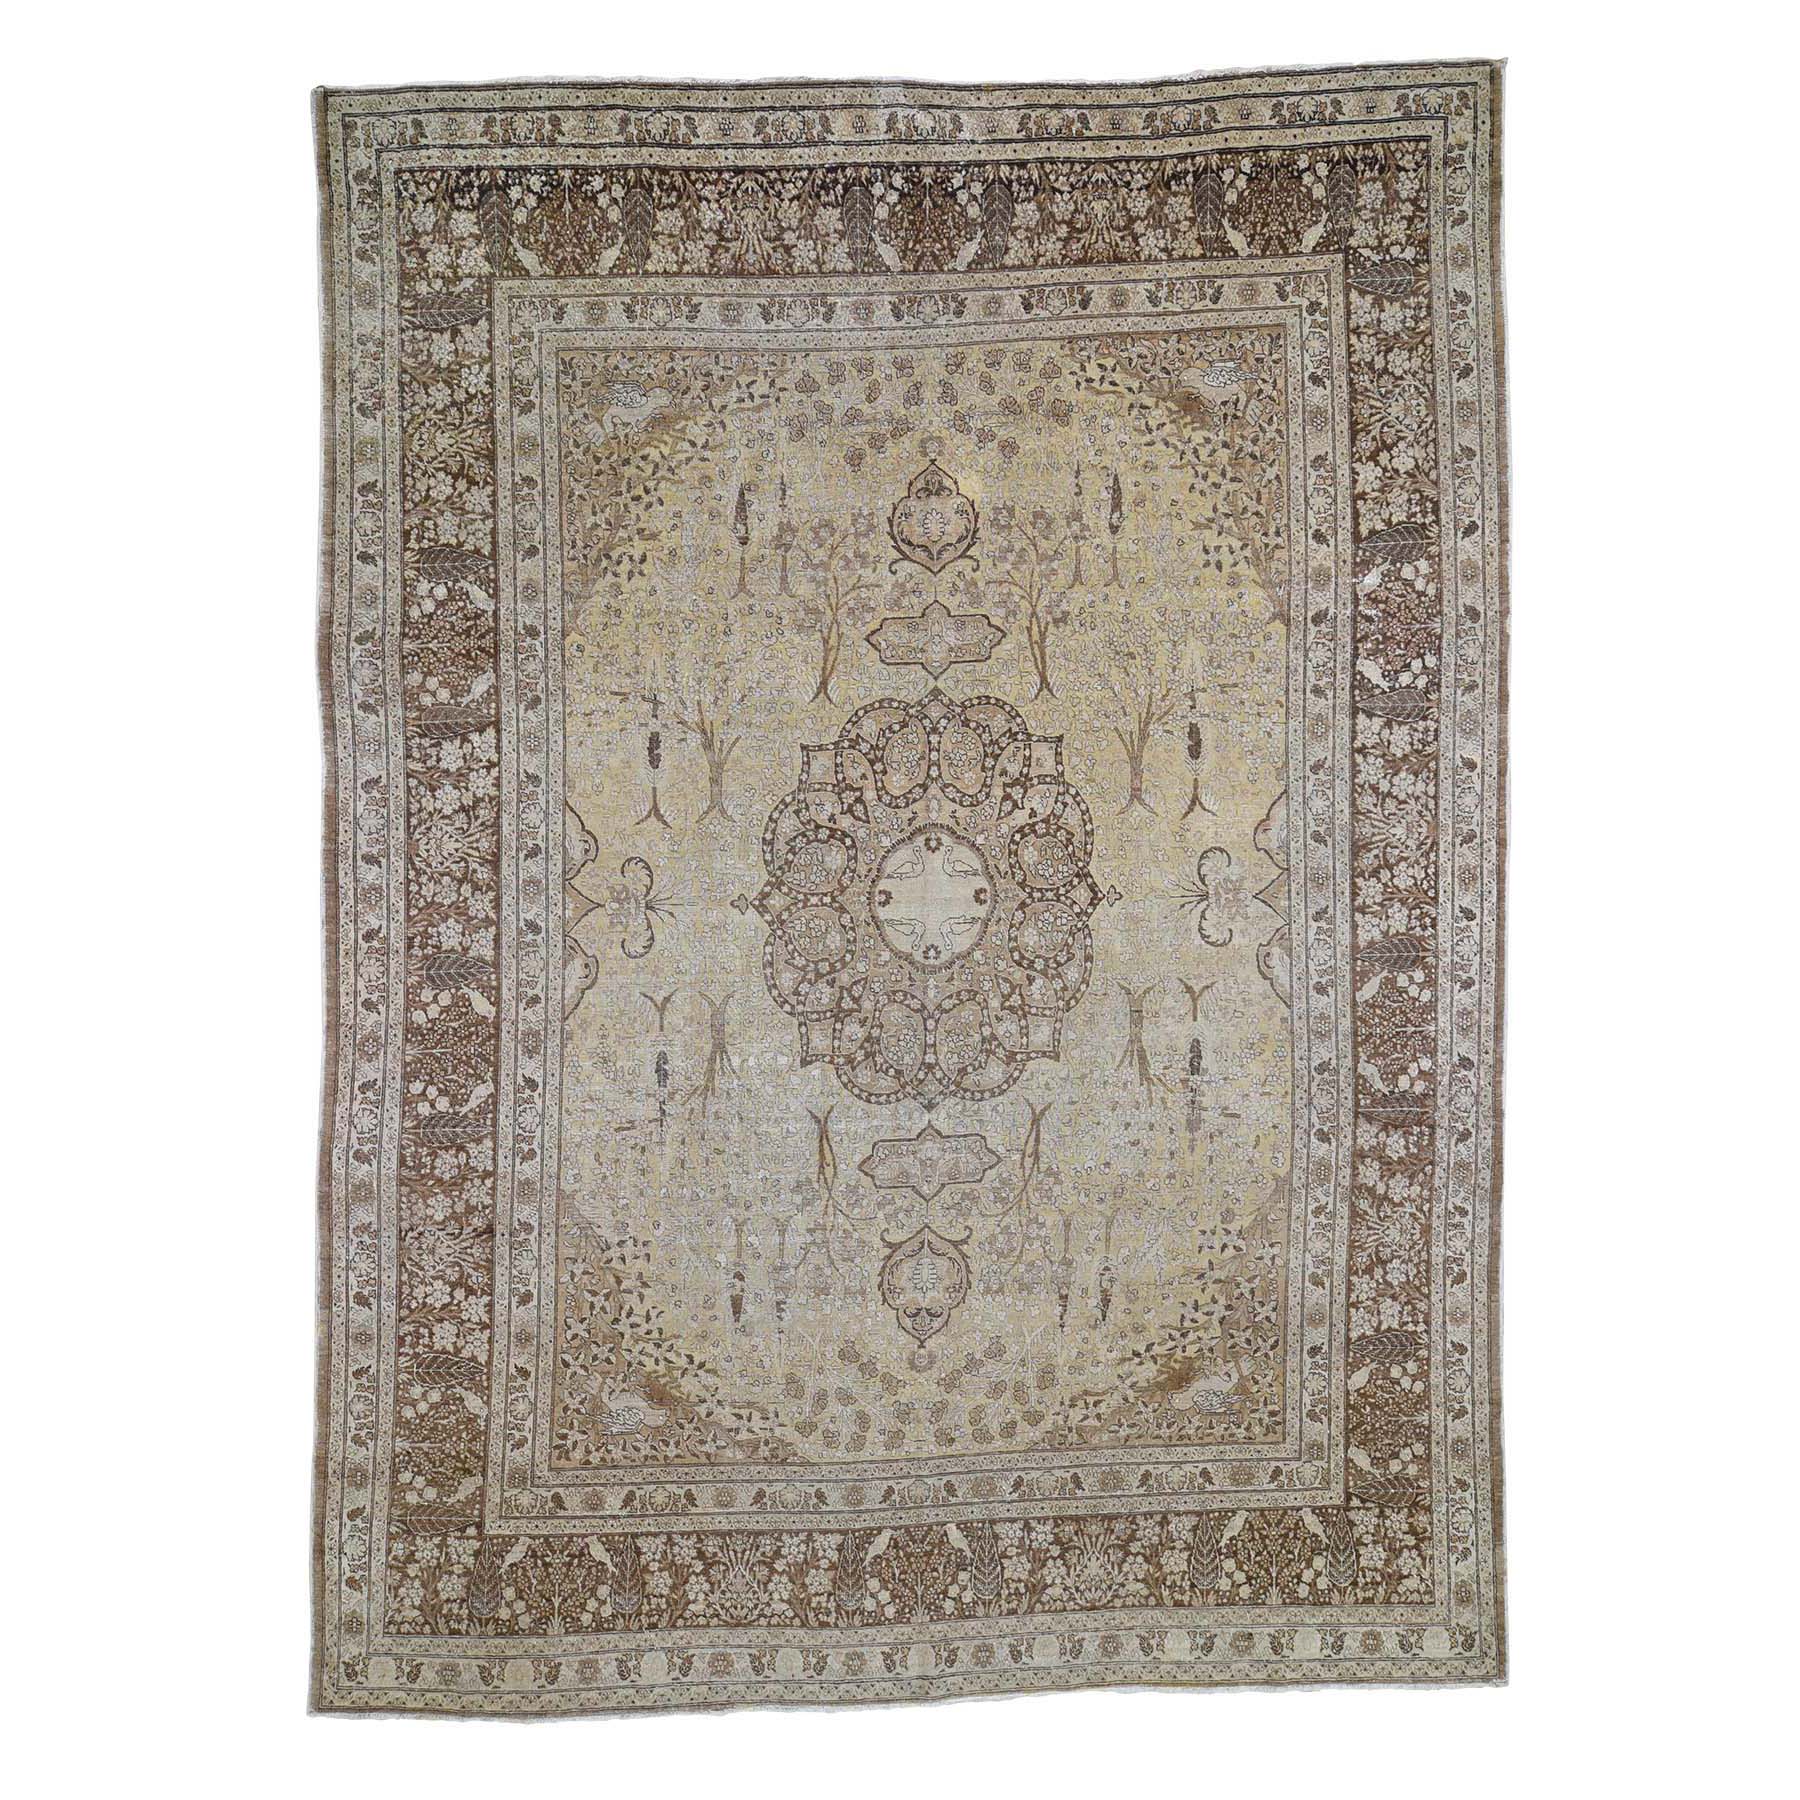 9'2"x12'5" Sand & Brown Color Antique Persian Tabriz Birds and Trees Design Pure Wool Even Wear Hand Woven Oriental Rug 